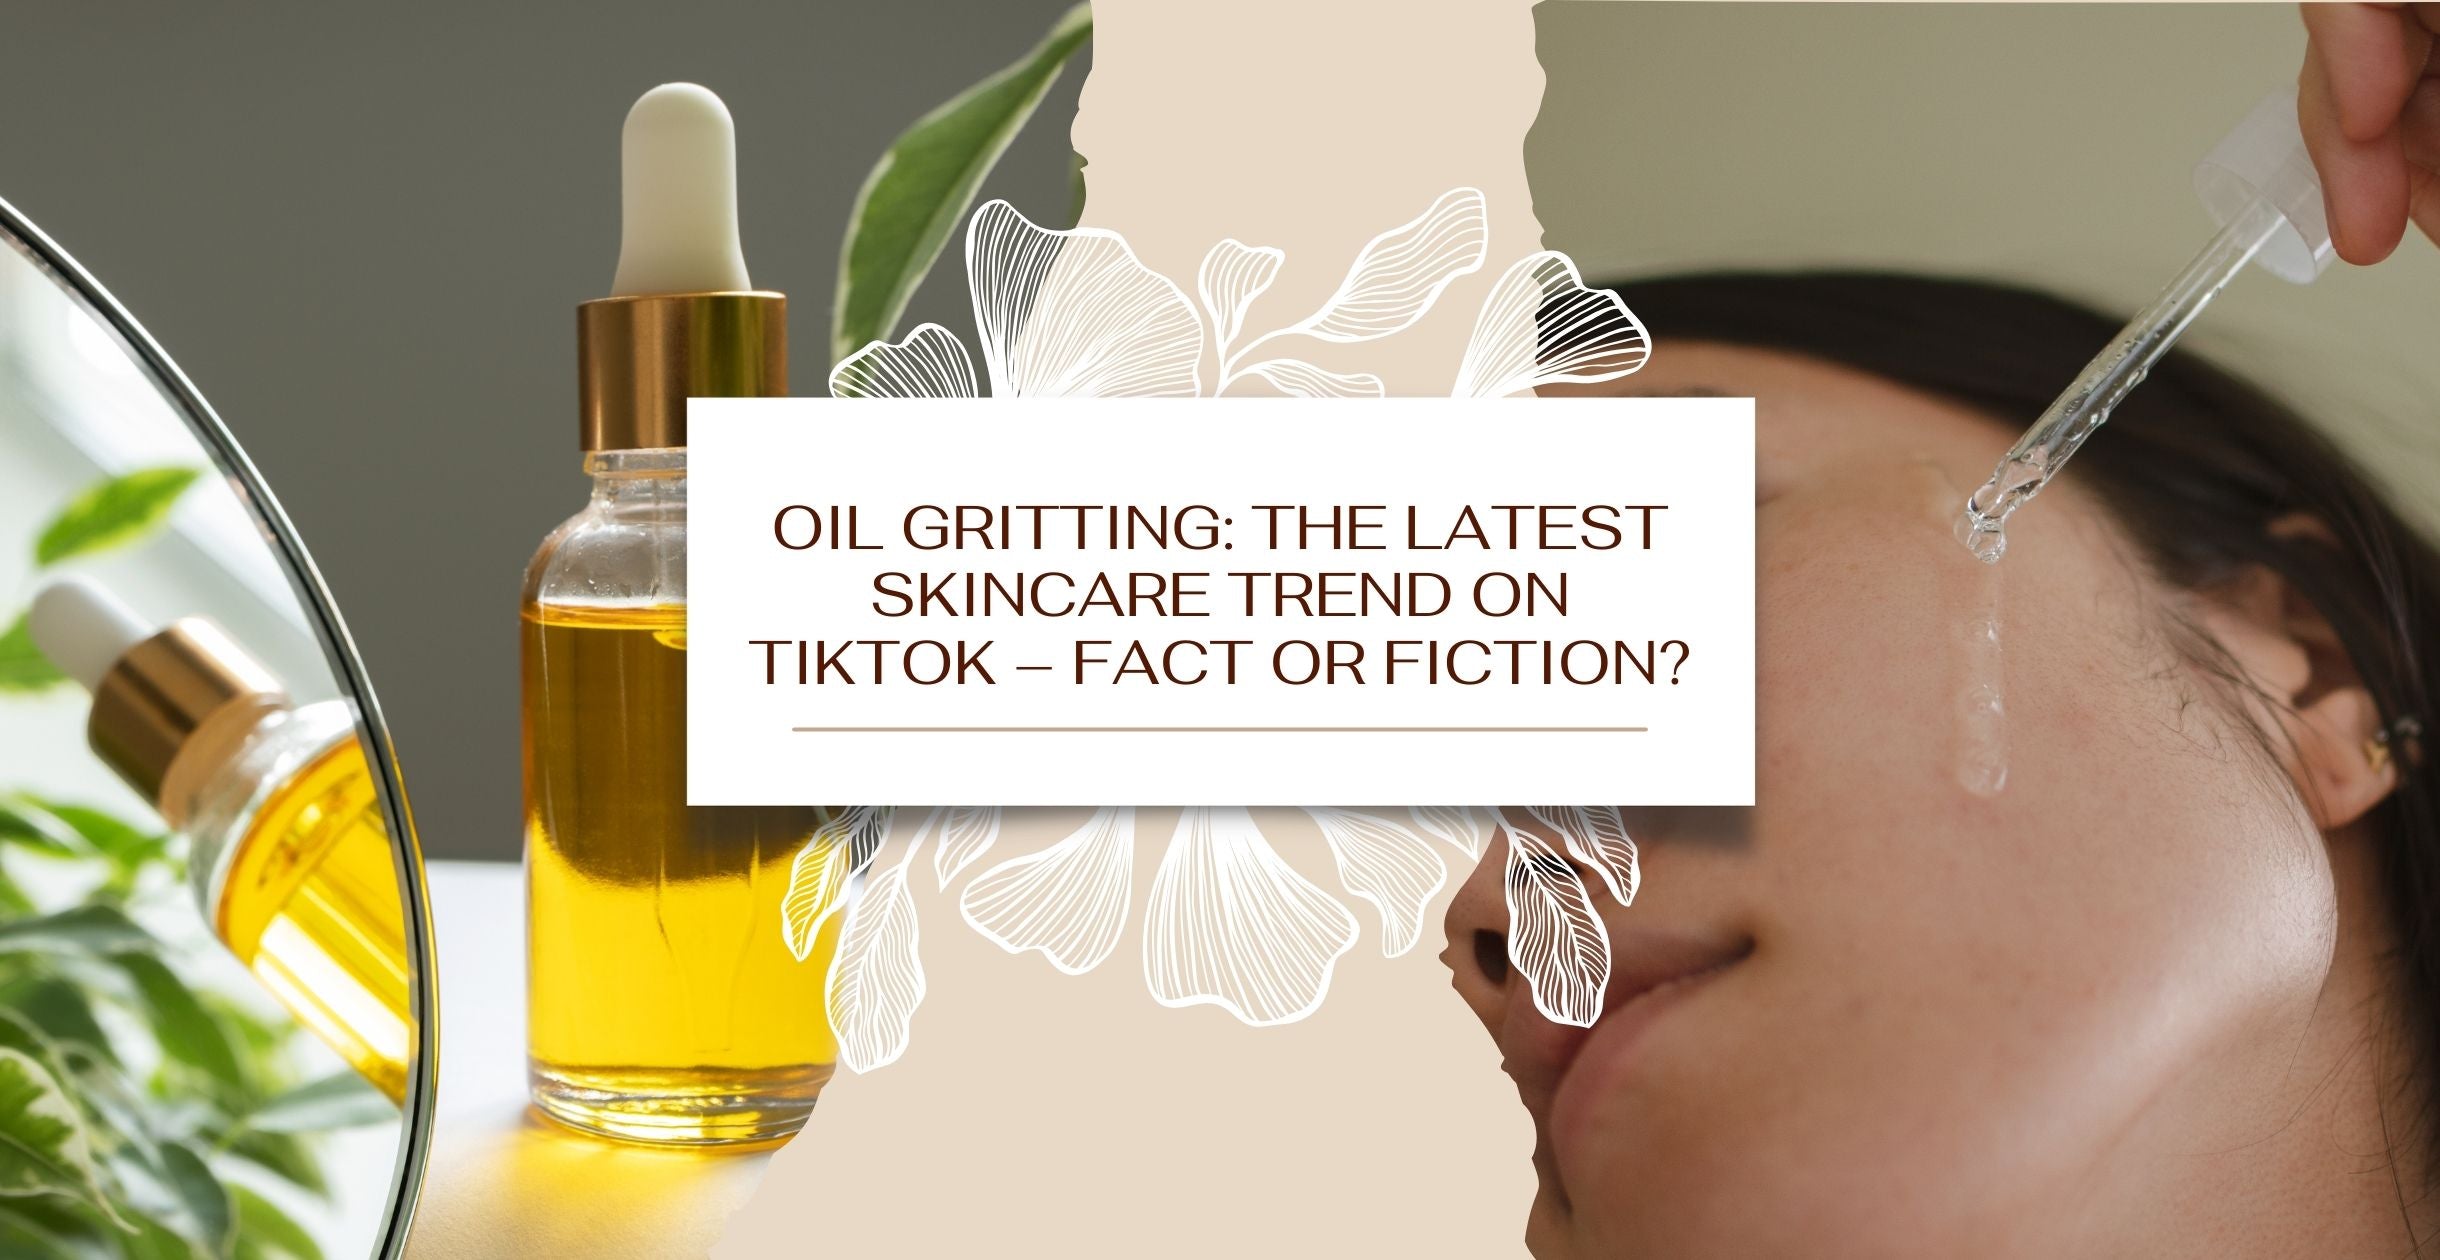 Oil Gritting: The Latest Skincare Trend on TikTok – Fact or Fiction?